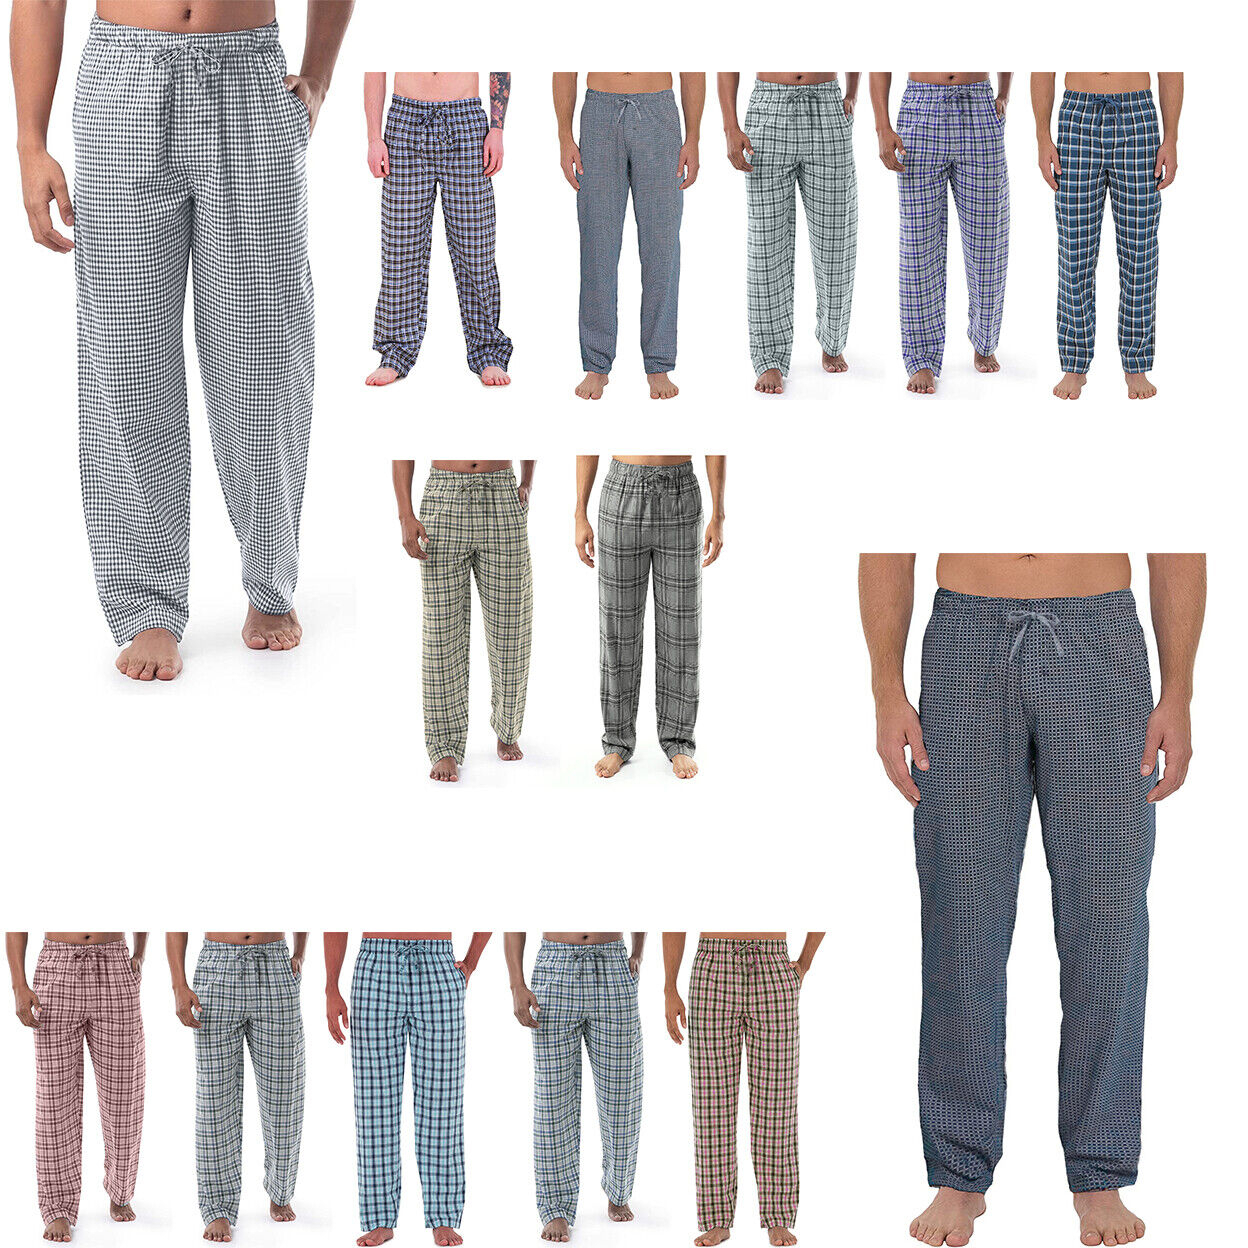 Multi-Pack: Men's Ultra-Soft Solid & Plaid Cotton Jersey Knit Comfy Sleep Lounge Pajama Pants - 3-pack Solid, Large